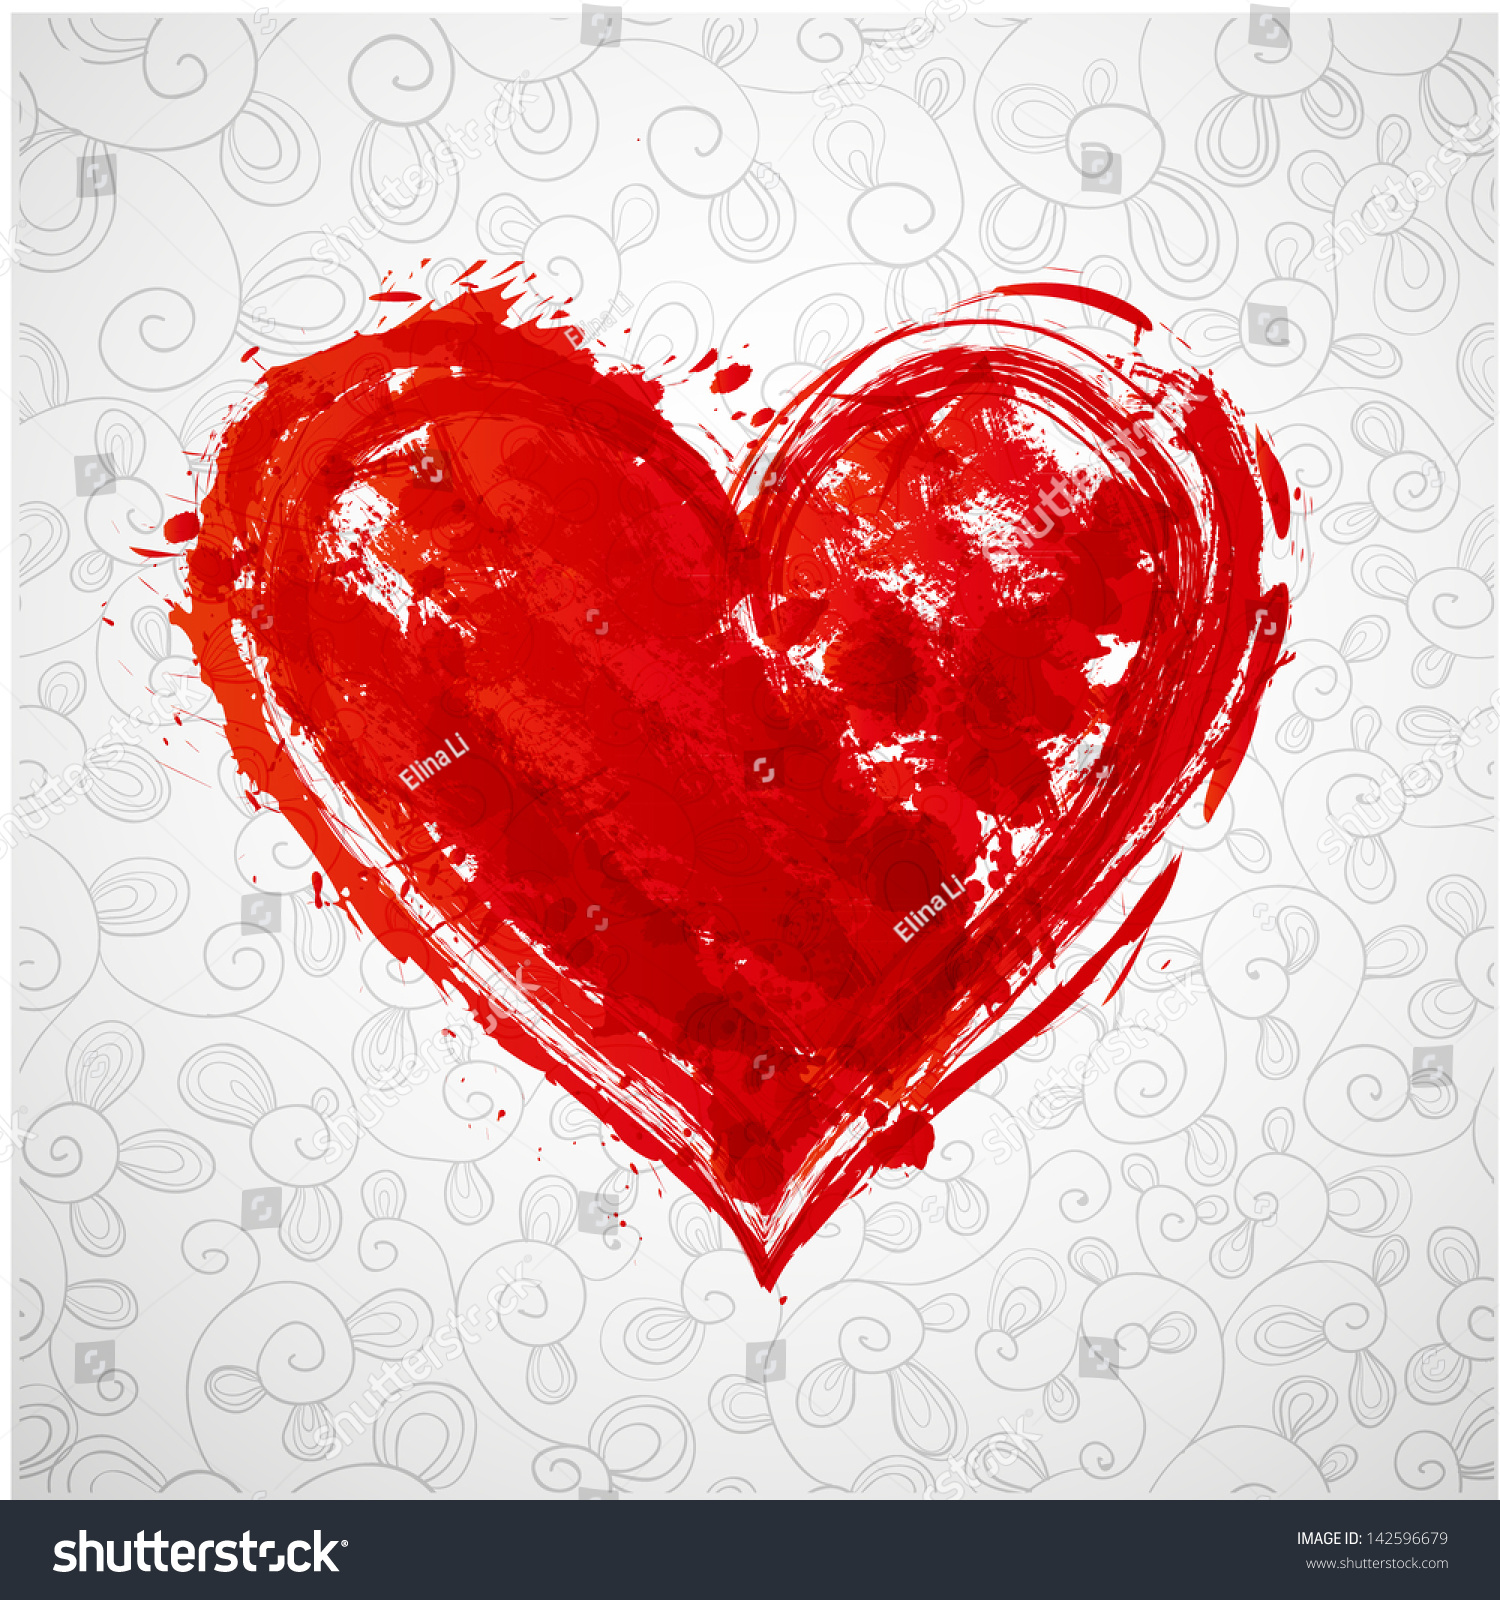 SVG of Card with grunge heart and pattern. Vector illustration. svg